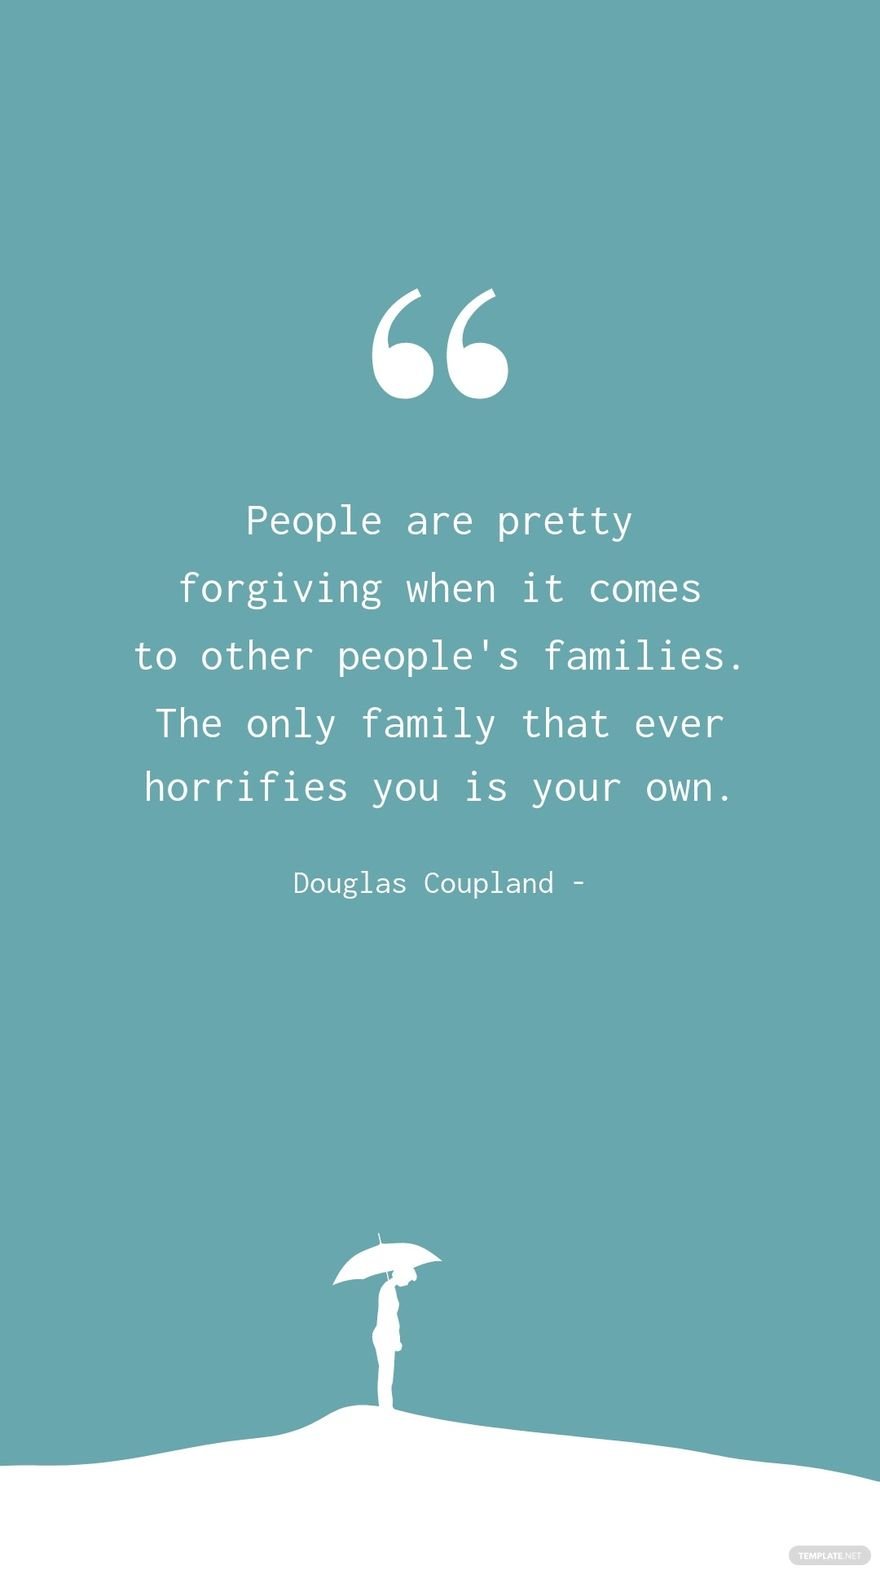 Douglas Coupland - People are pretty forgiving when it comes to other people's families. The only family that ever horrifies you is your own.